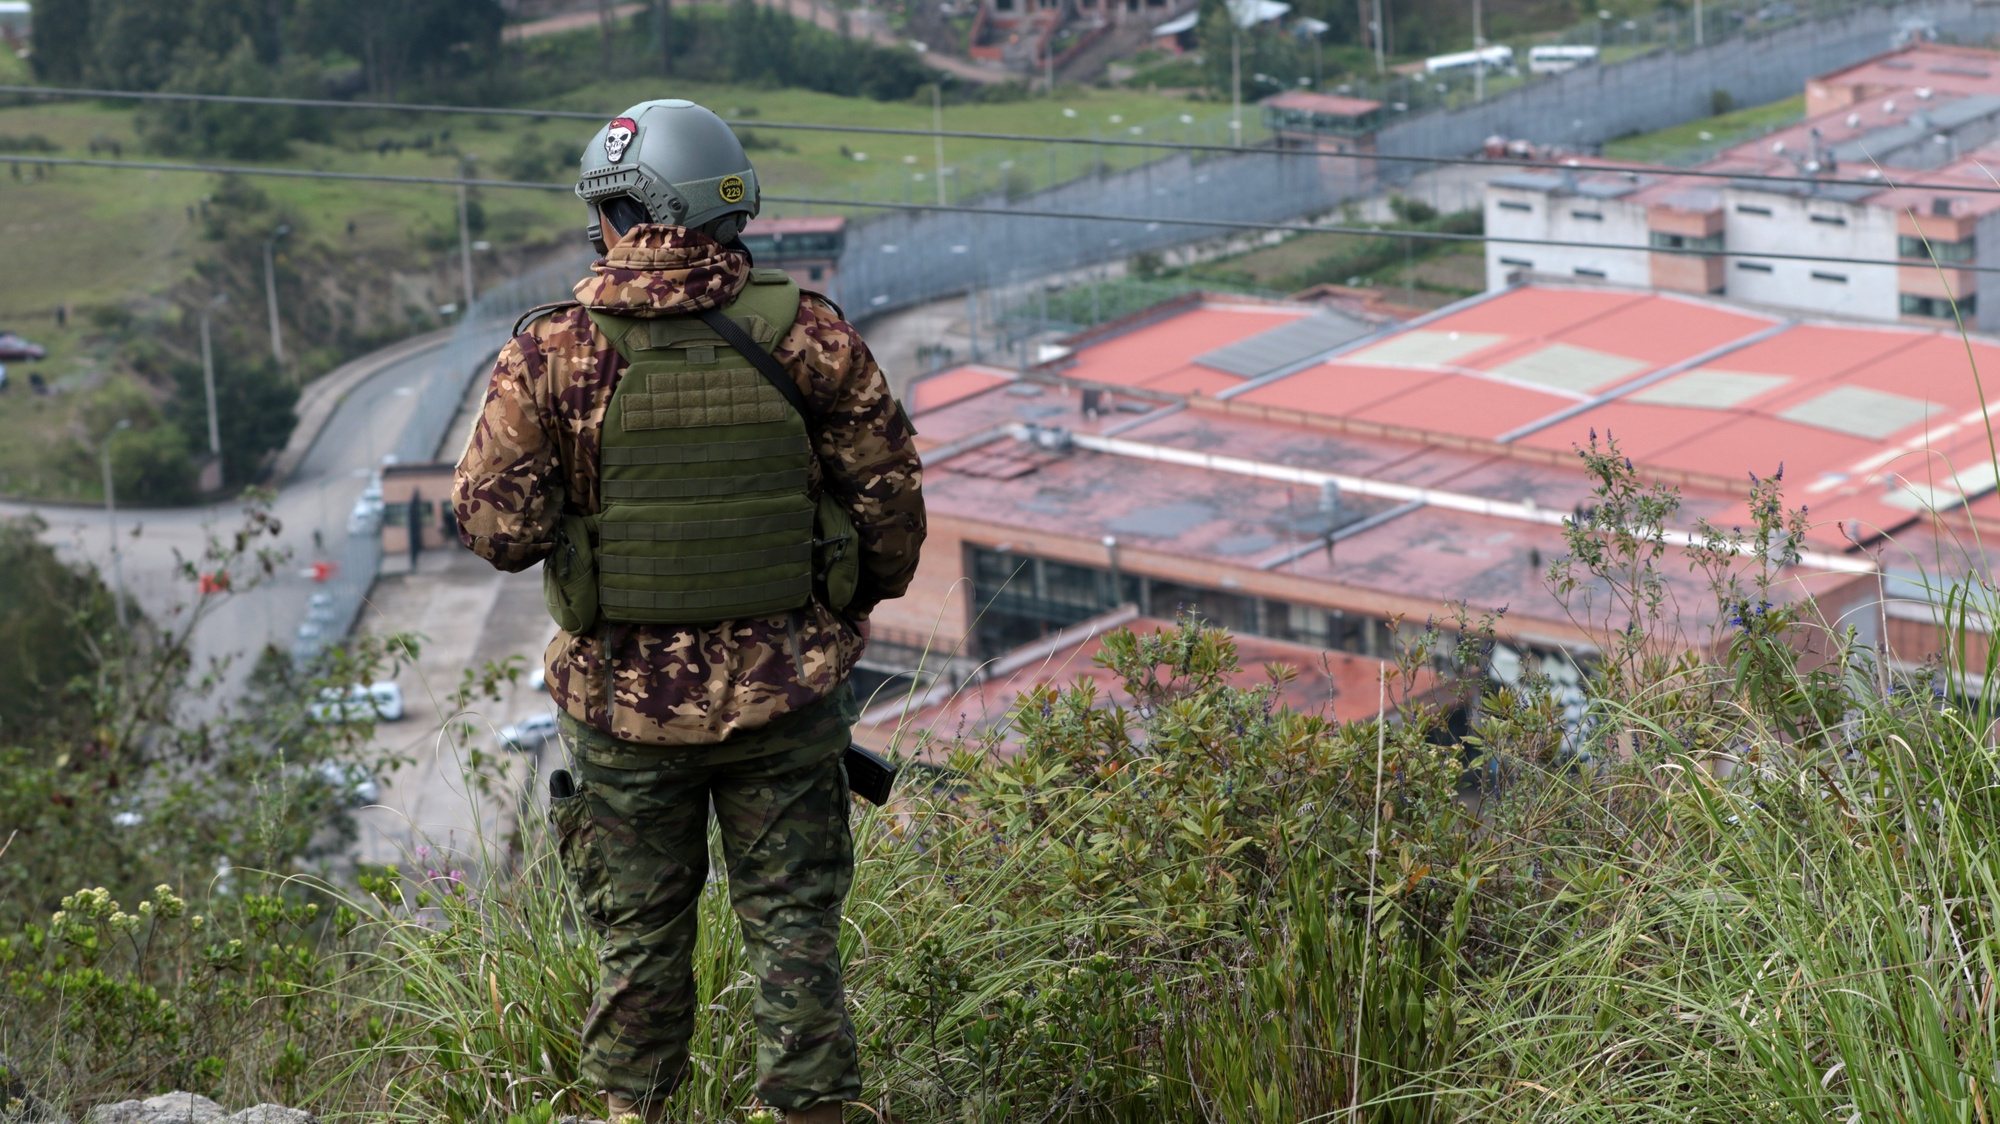 epa11076801 A soldier watches over the surroundings of the Turi prison during the military and police operation to regain control of the penitentiary center, in Cuenca, Ecuador, 14 January 2024. Ecuadorian President Daniel Noboa announced on X (formerly Twitter) that joint operation of Armed Forces and the Police released the prison security and surveillance force and the administrative personnel who were held in Detention Centers, after a violent week of attacks by organized crime. Following the attacks and violent acts that occurred on 09 January in the country, Noboa decreed a state of emergency, declared the existence of an internal armed conflict, and ordered the Public Force to carry out security and control operations in different locations in Ecuador.  EPA/Xavier Calvinagua